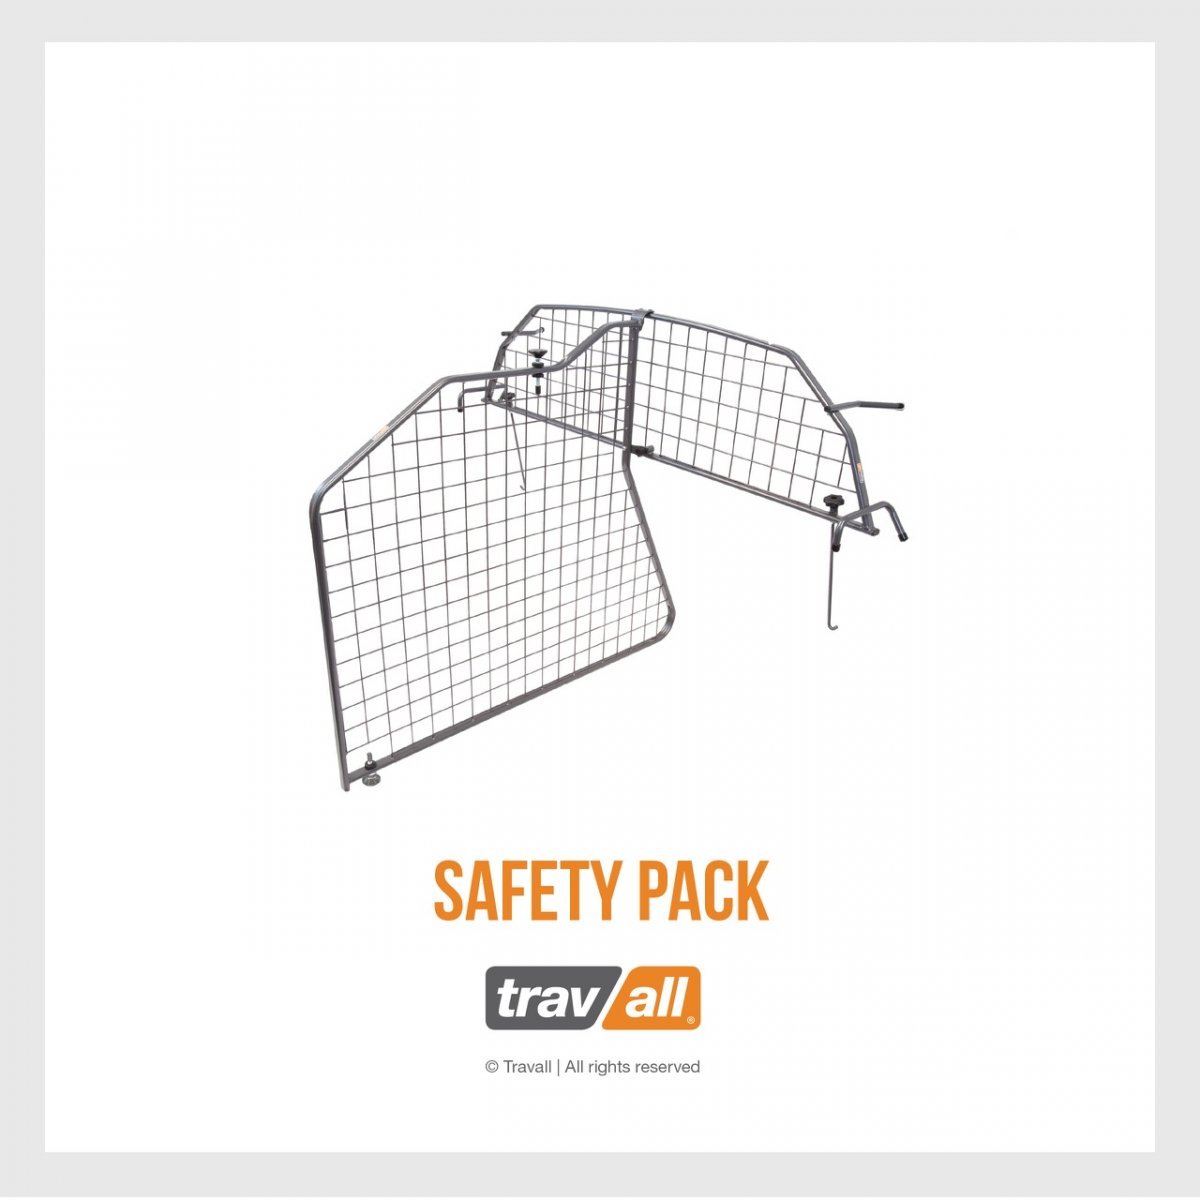 Safety Pack for Land Rover Range Rover L405 2012 - 2016